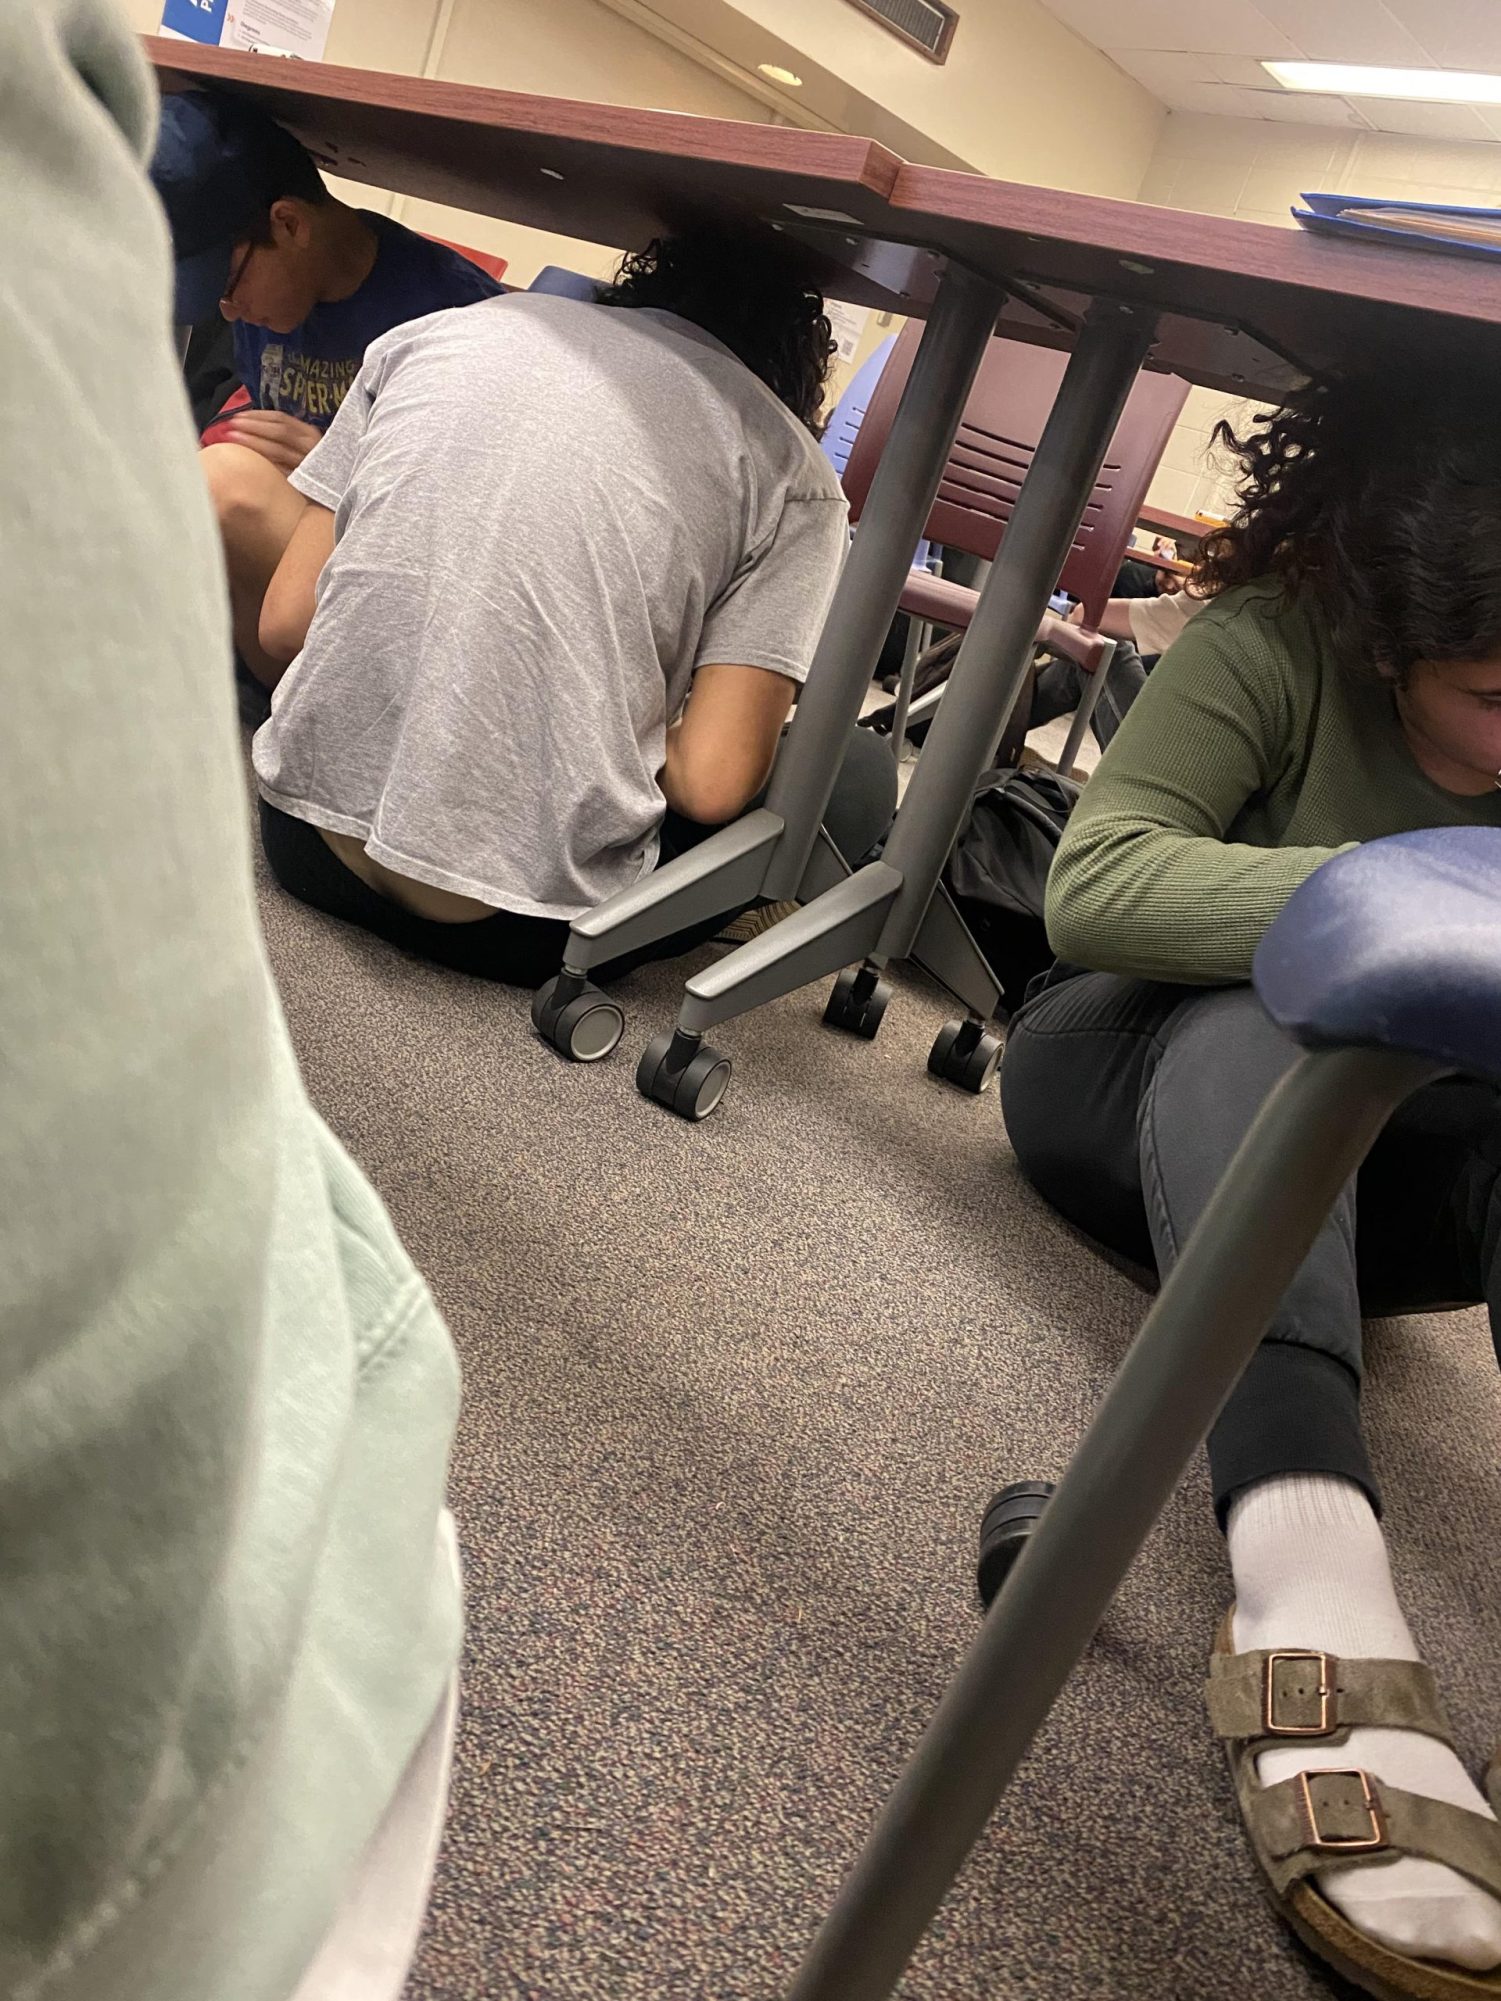 Students practice earthquake safety drill in great shakeout